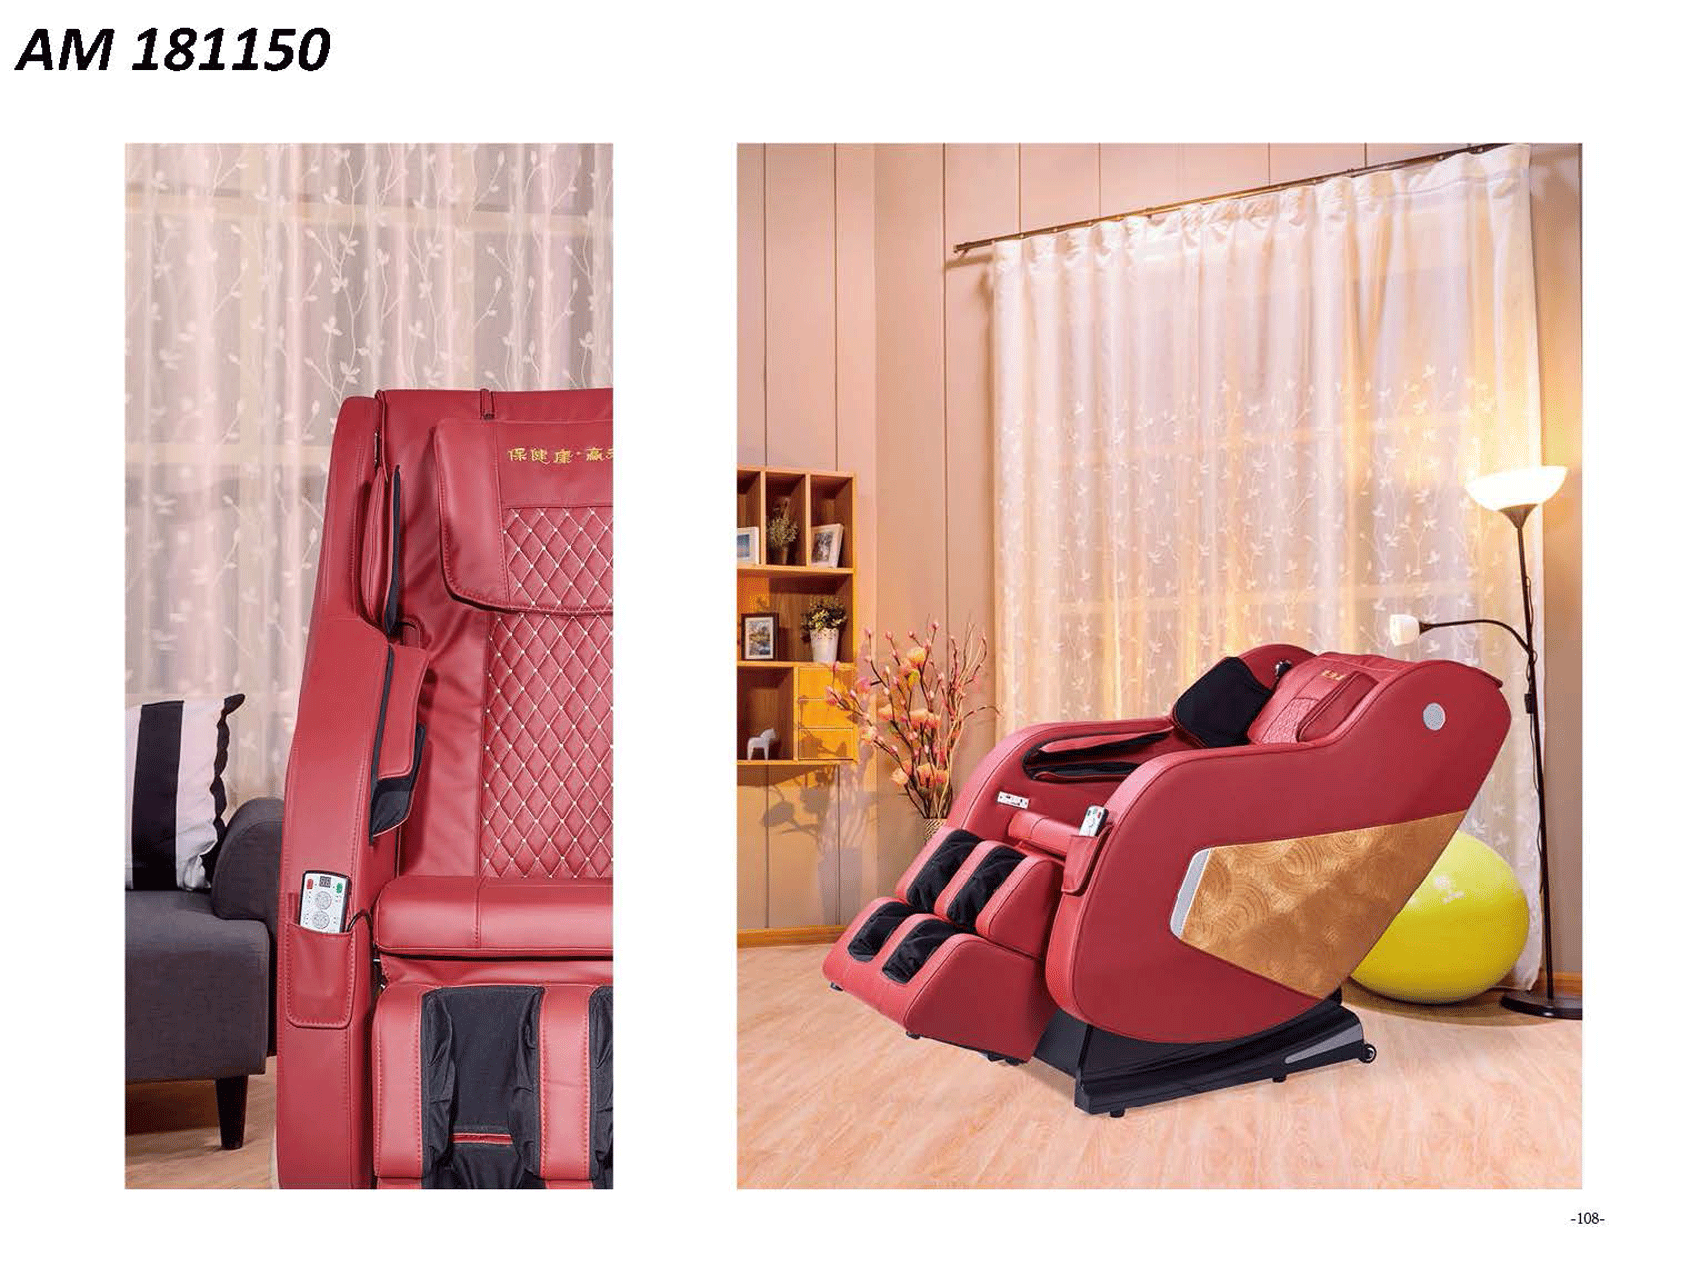 Living Room Furniture Reclining and Sliding Seats Sets AM 181150 Massage Chair